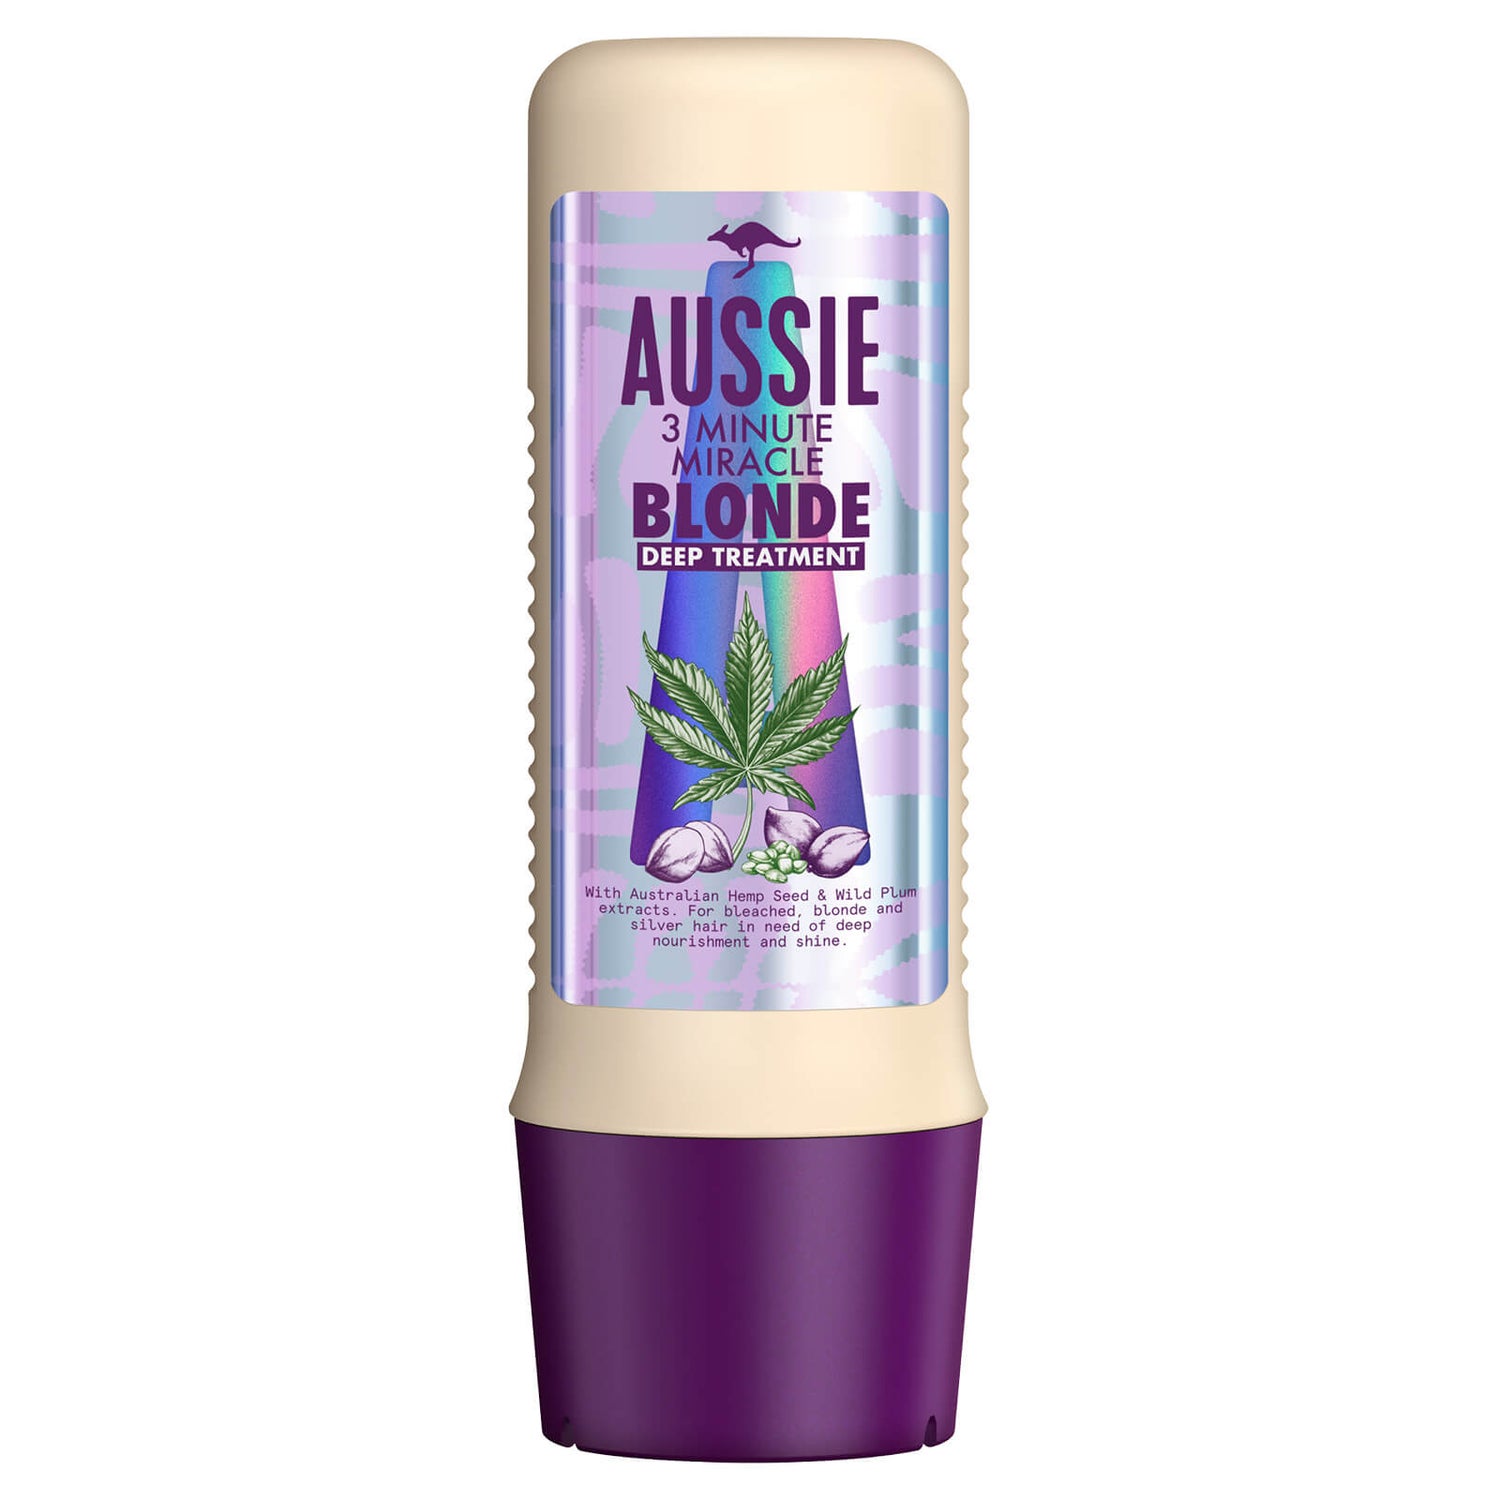 Aussie Blonde Hydration 3 Minute Miracle Hair Mask 225ml